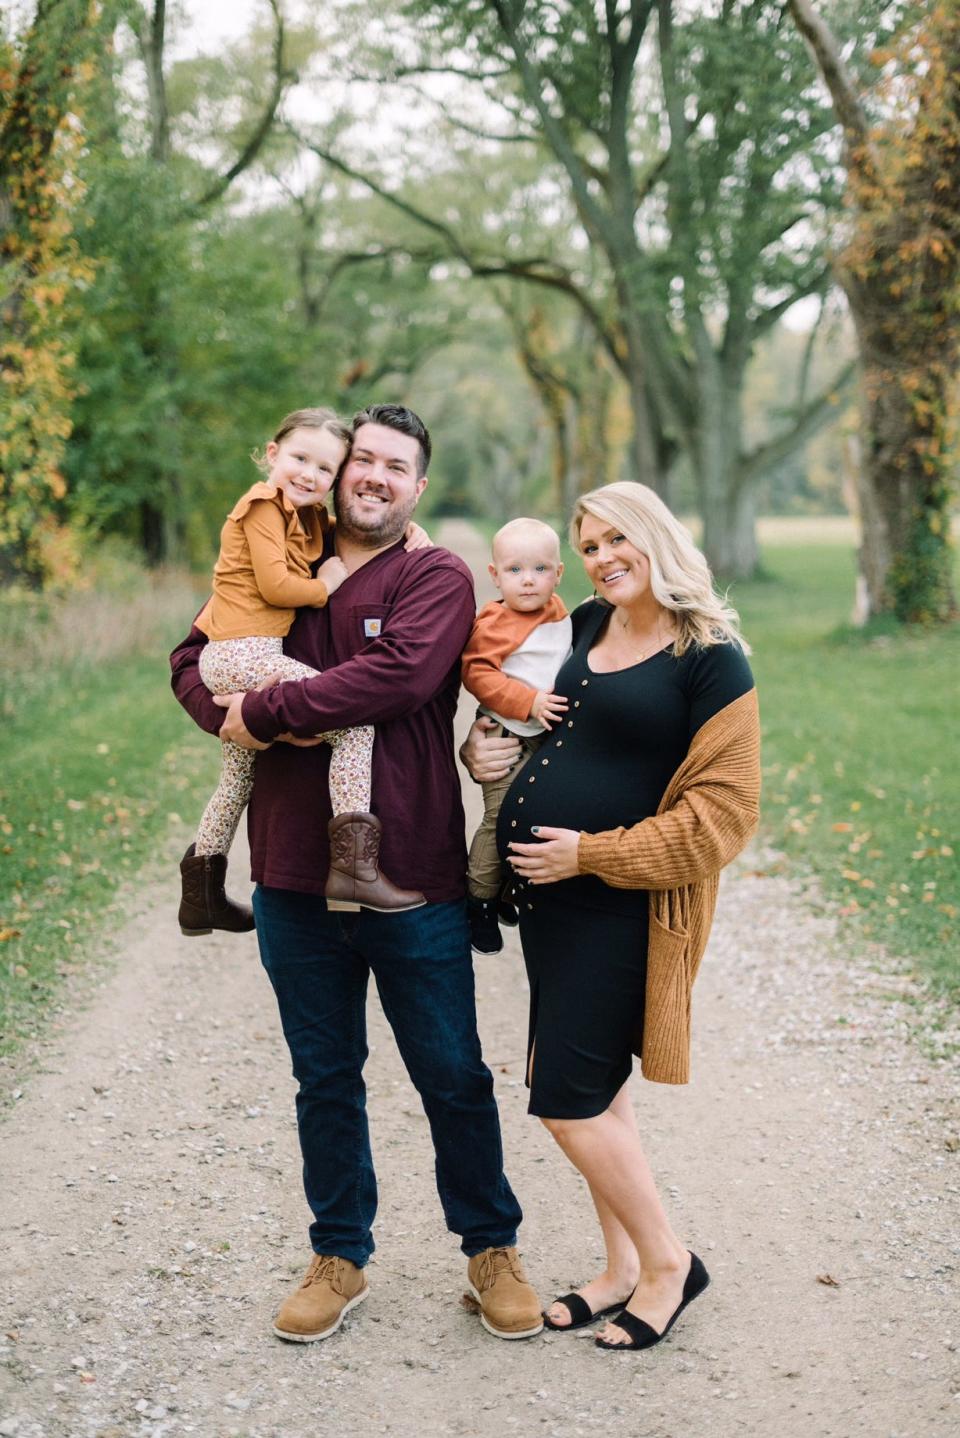 Nicholas and Sydney Jowett with their three-year-old daughter, Claire, and one-year-old son, Leo.